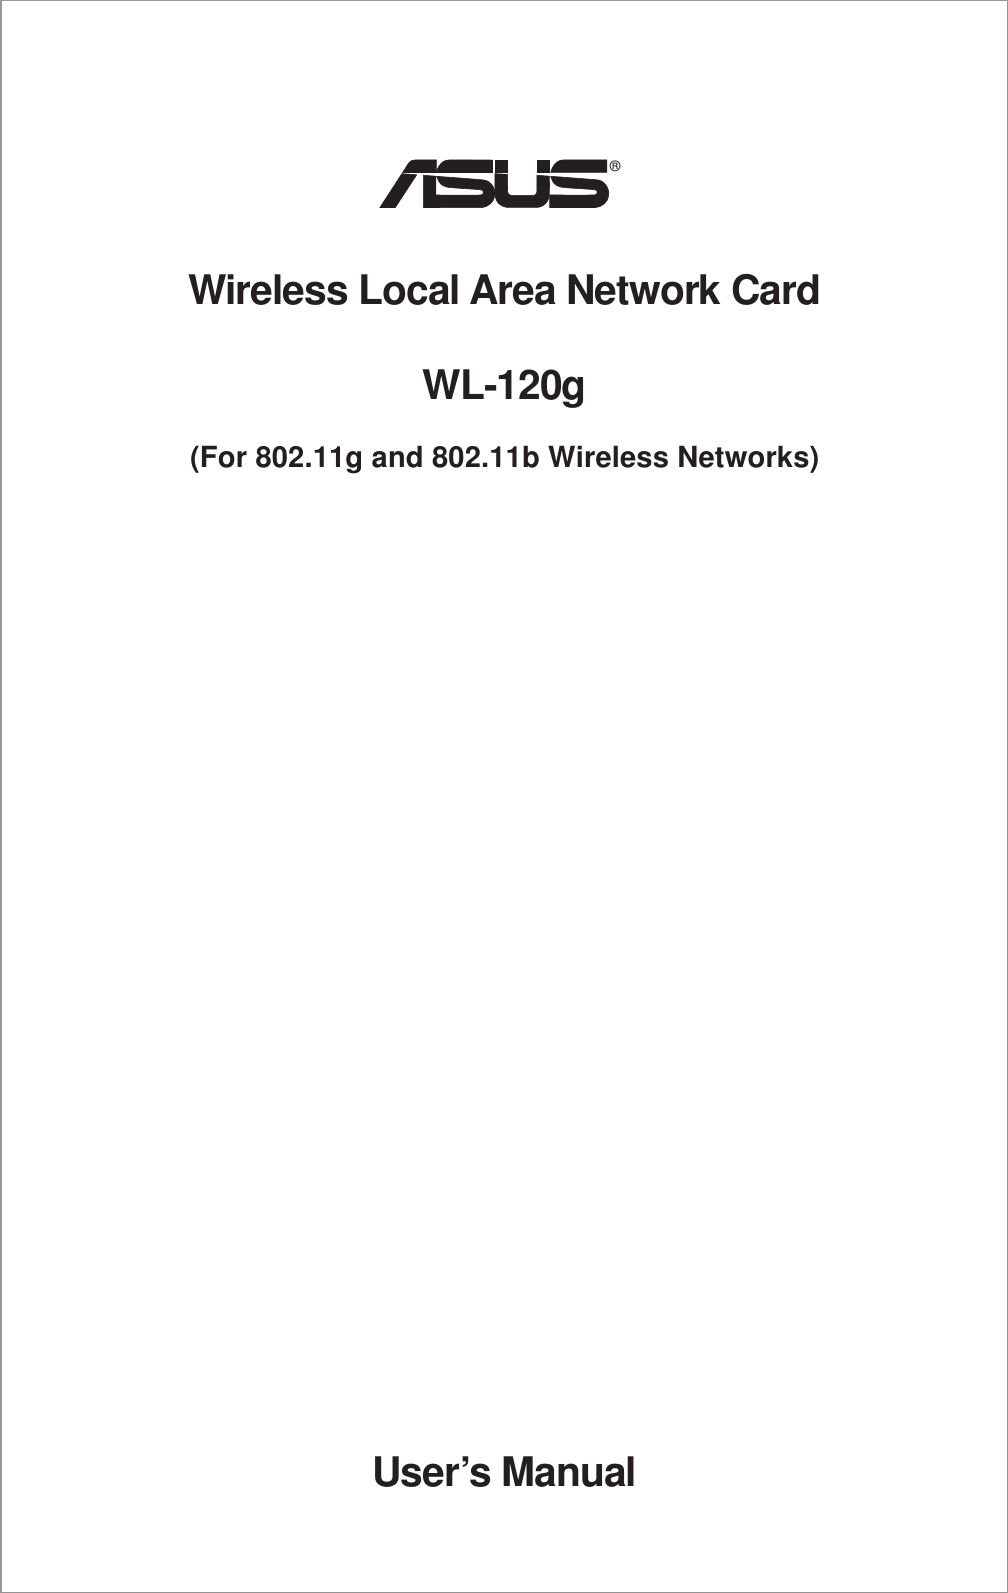 Wireless Local Area Network CardWL-120g(For 802.11g and 802.11b Wireless Networks)®User’s Manual